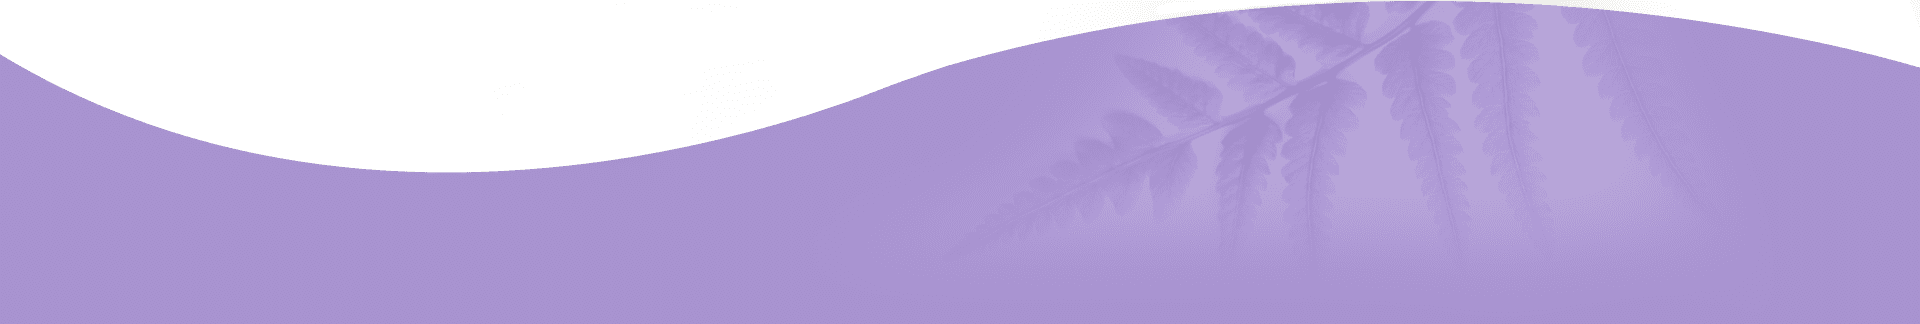 A purple and green background with a wave